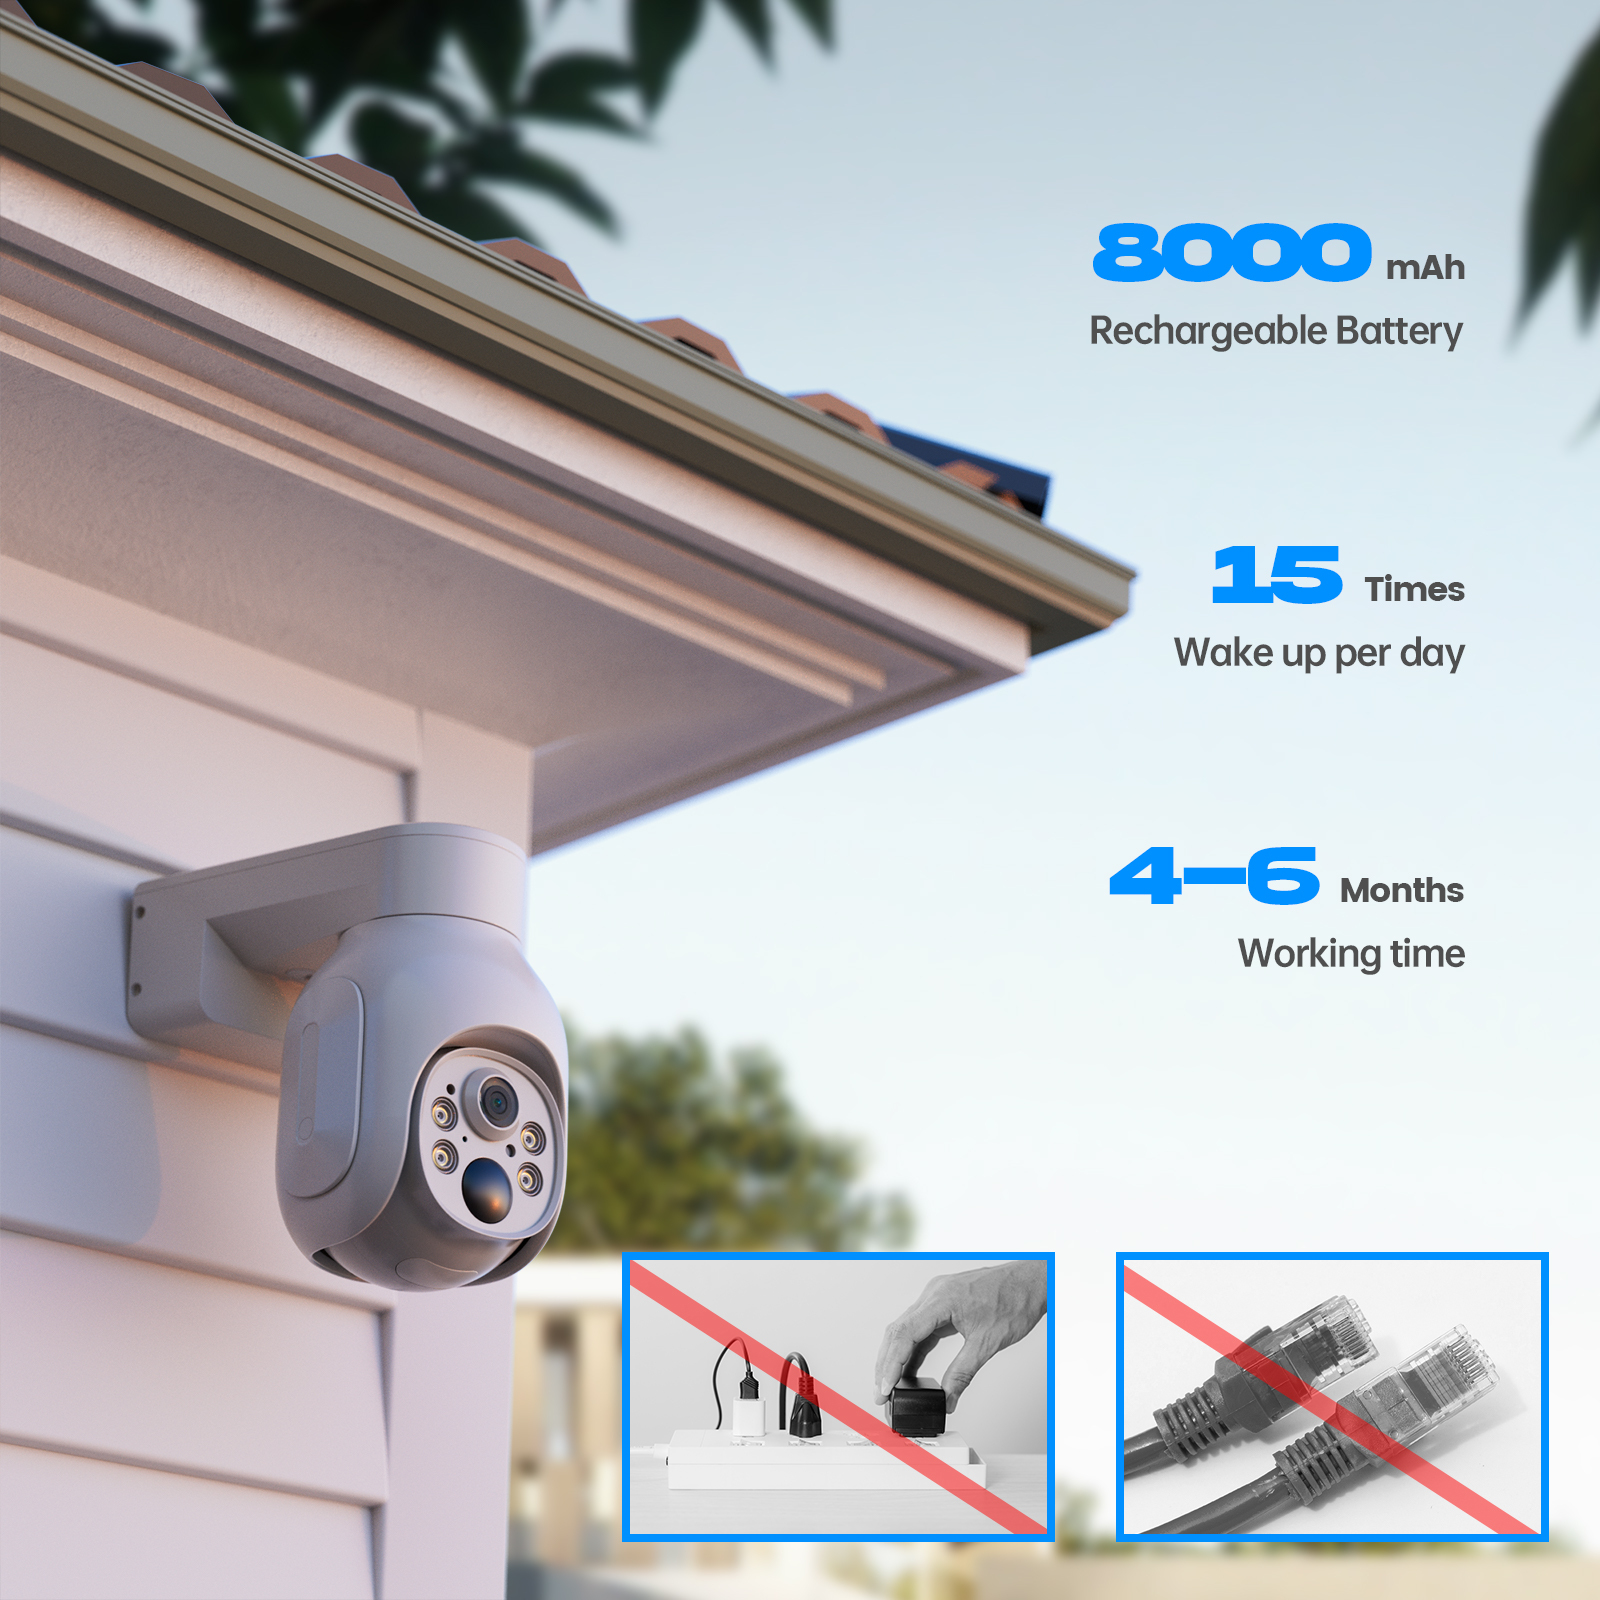 Toguard SC19A Solar Wireless Security Camera System Outdoor Battery WiFi Dome Surveillance Camera Wireless Connector - image 3 of 8